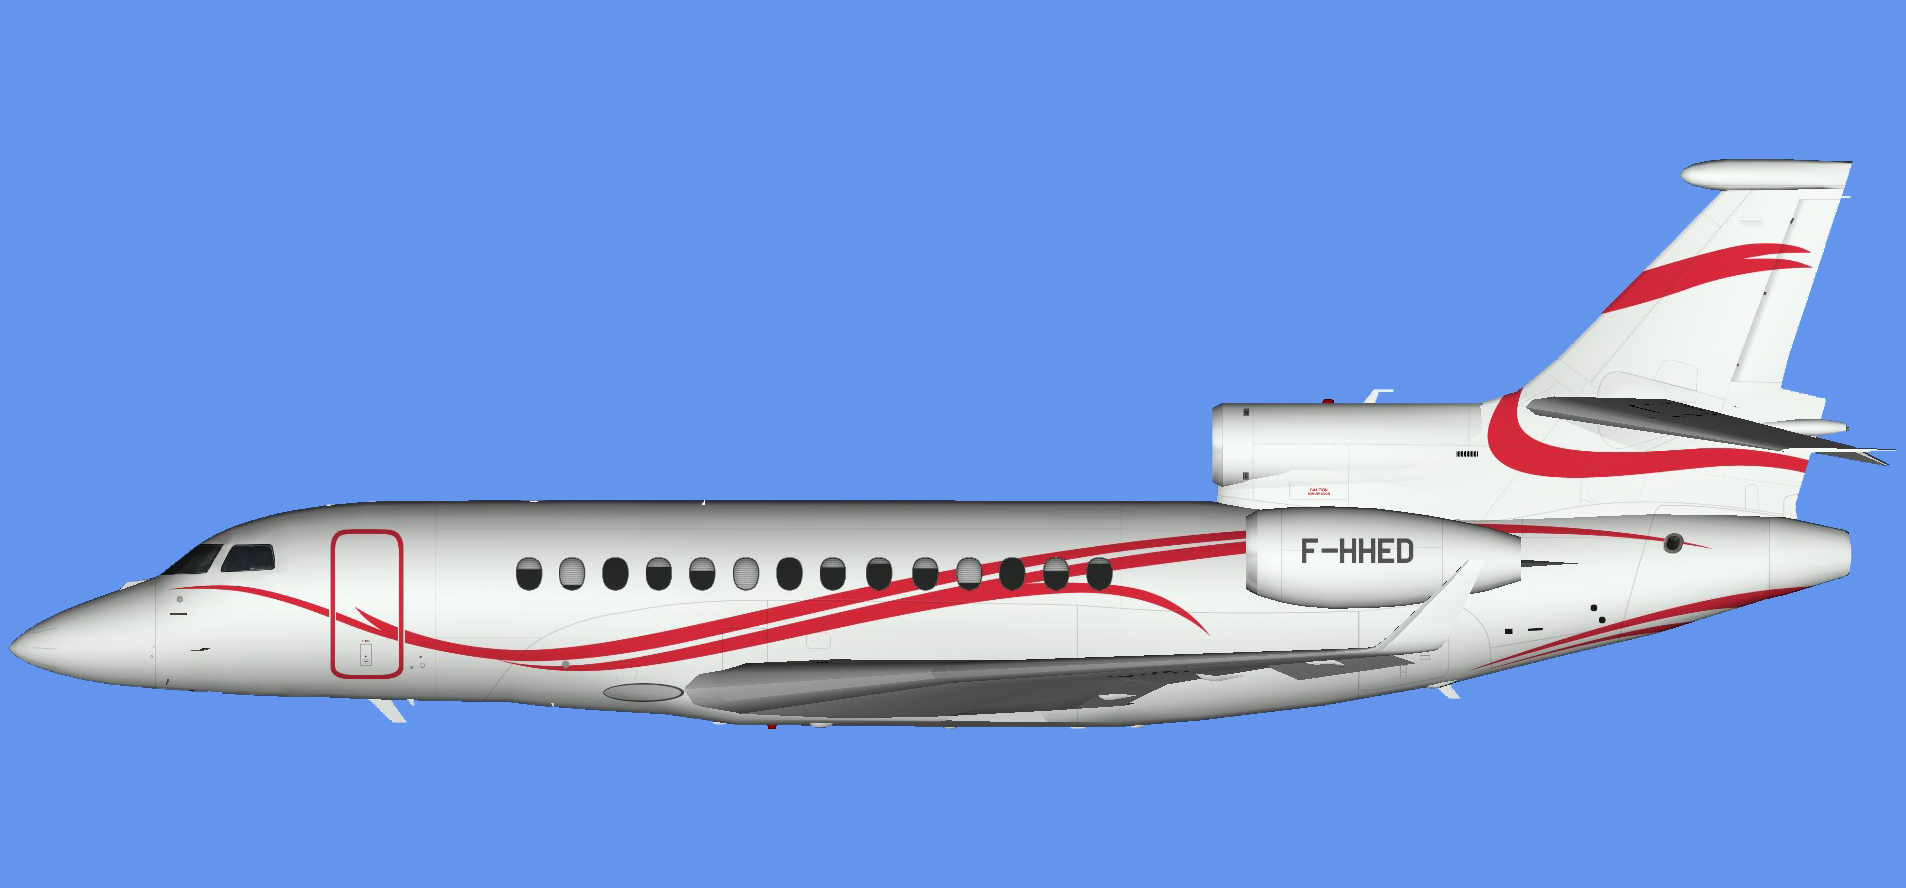 Dassault Falcon 7x F-HHED